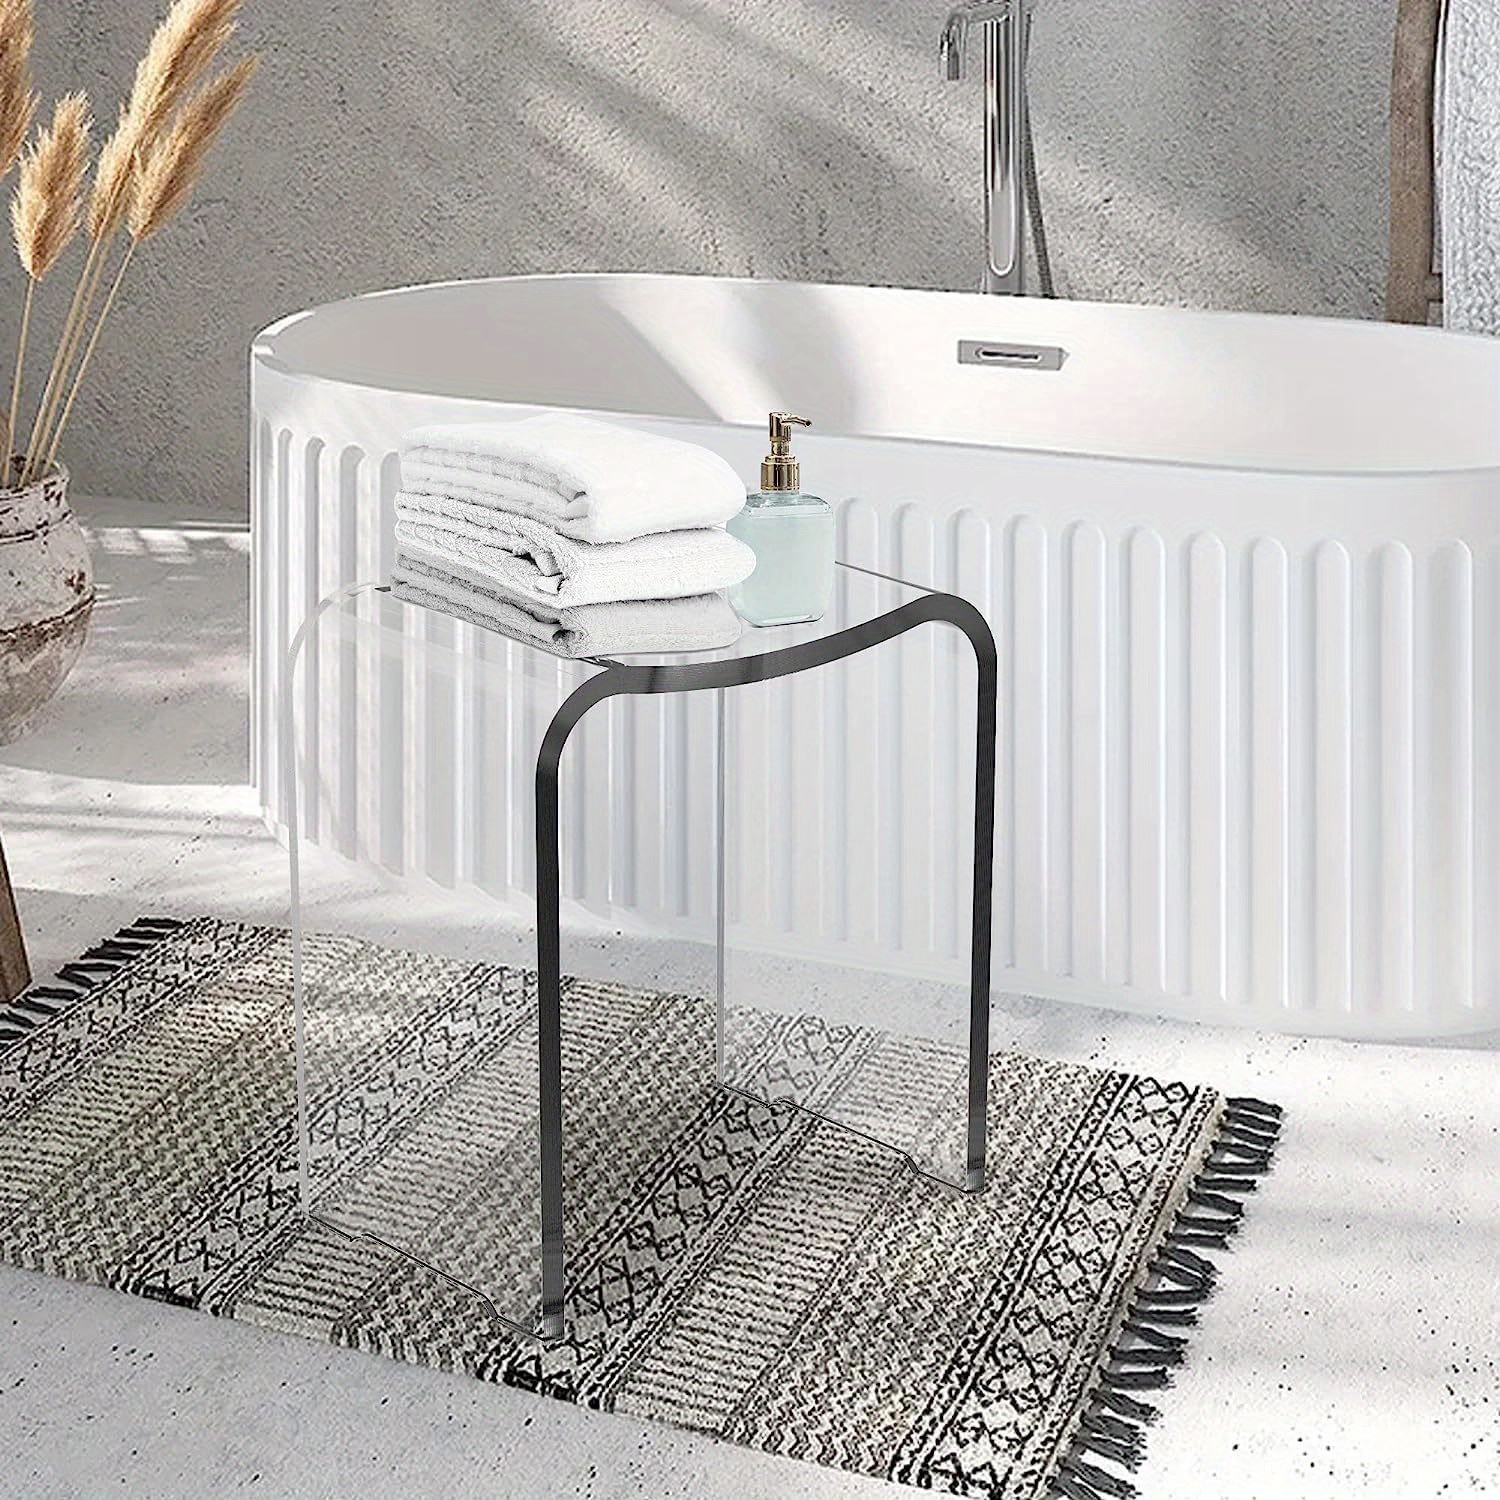 

Acrylic Shower Bench, Clear Shower Stool For Inside Shower, Modern Shower Chair Bath Seat With Rounded Edge, 300lbs Weight Capacity